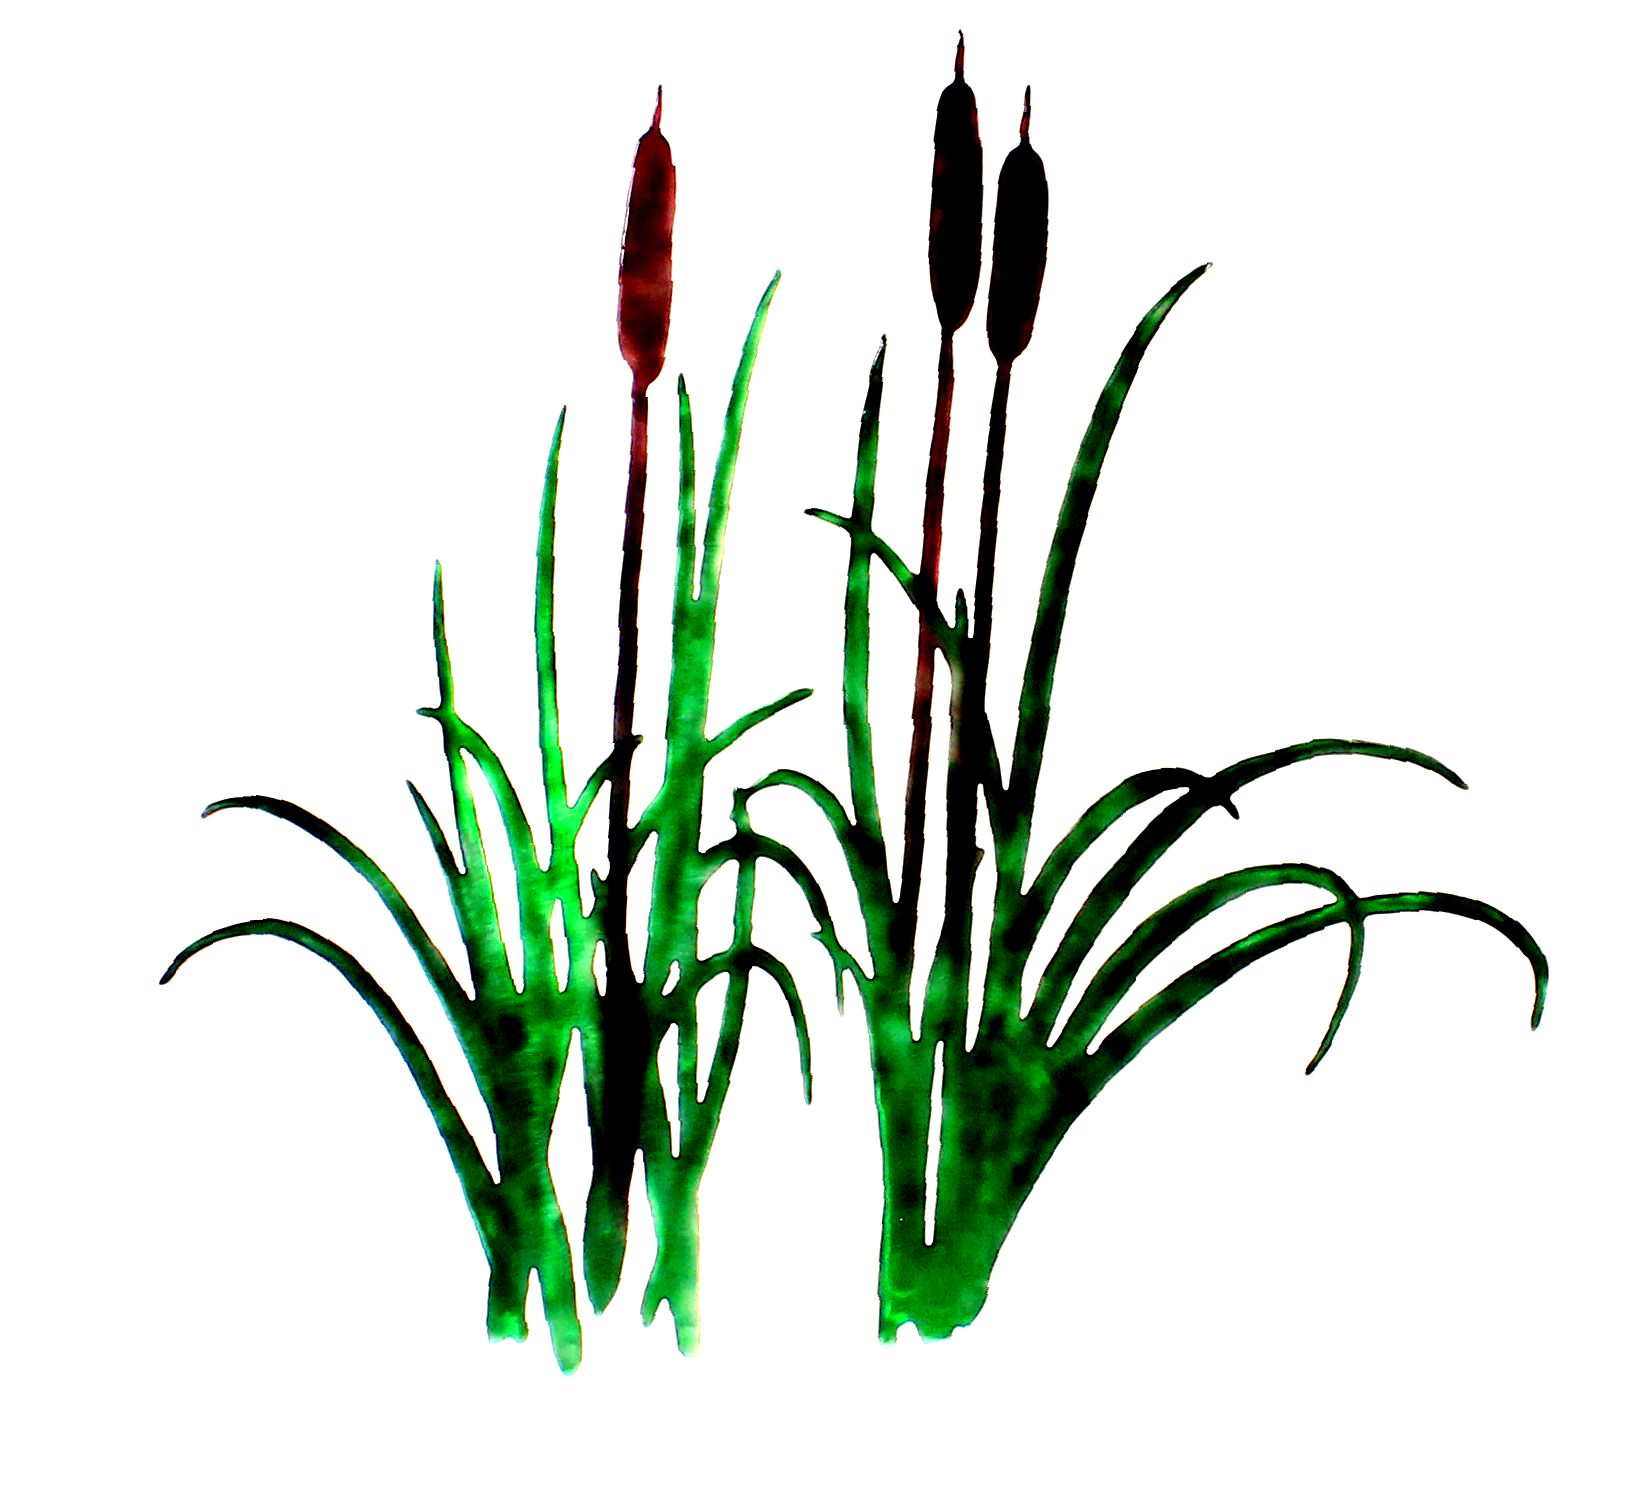 ... Image of Cattails Clipart - Cattails Clipart